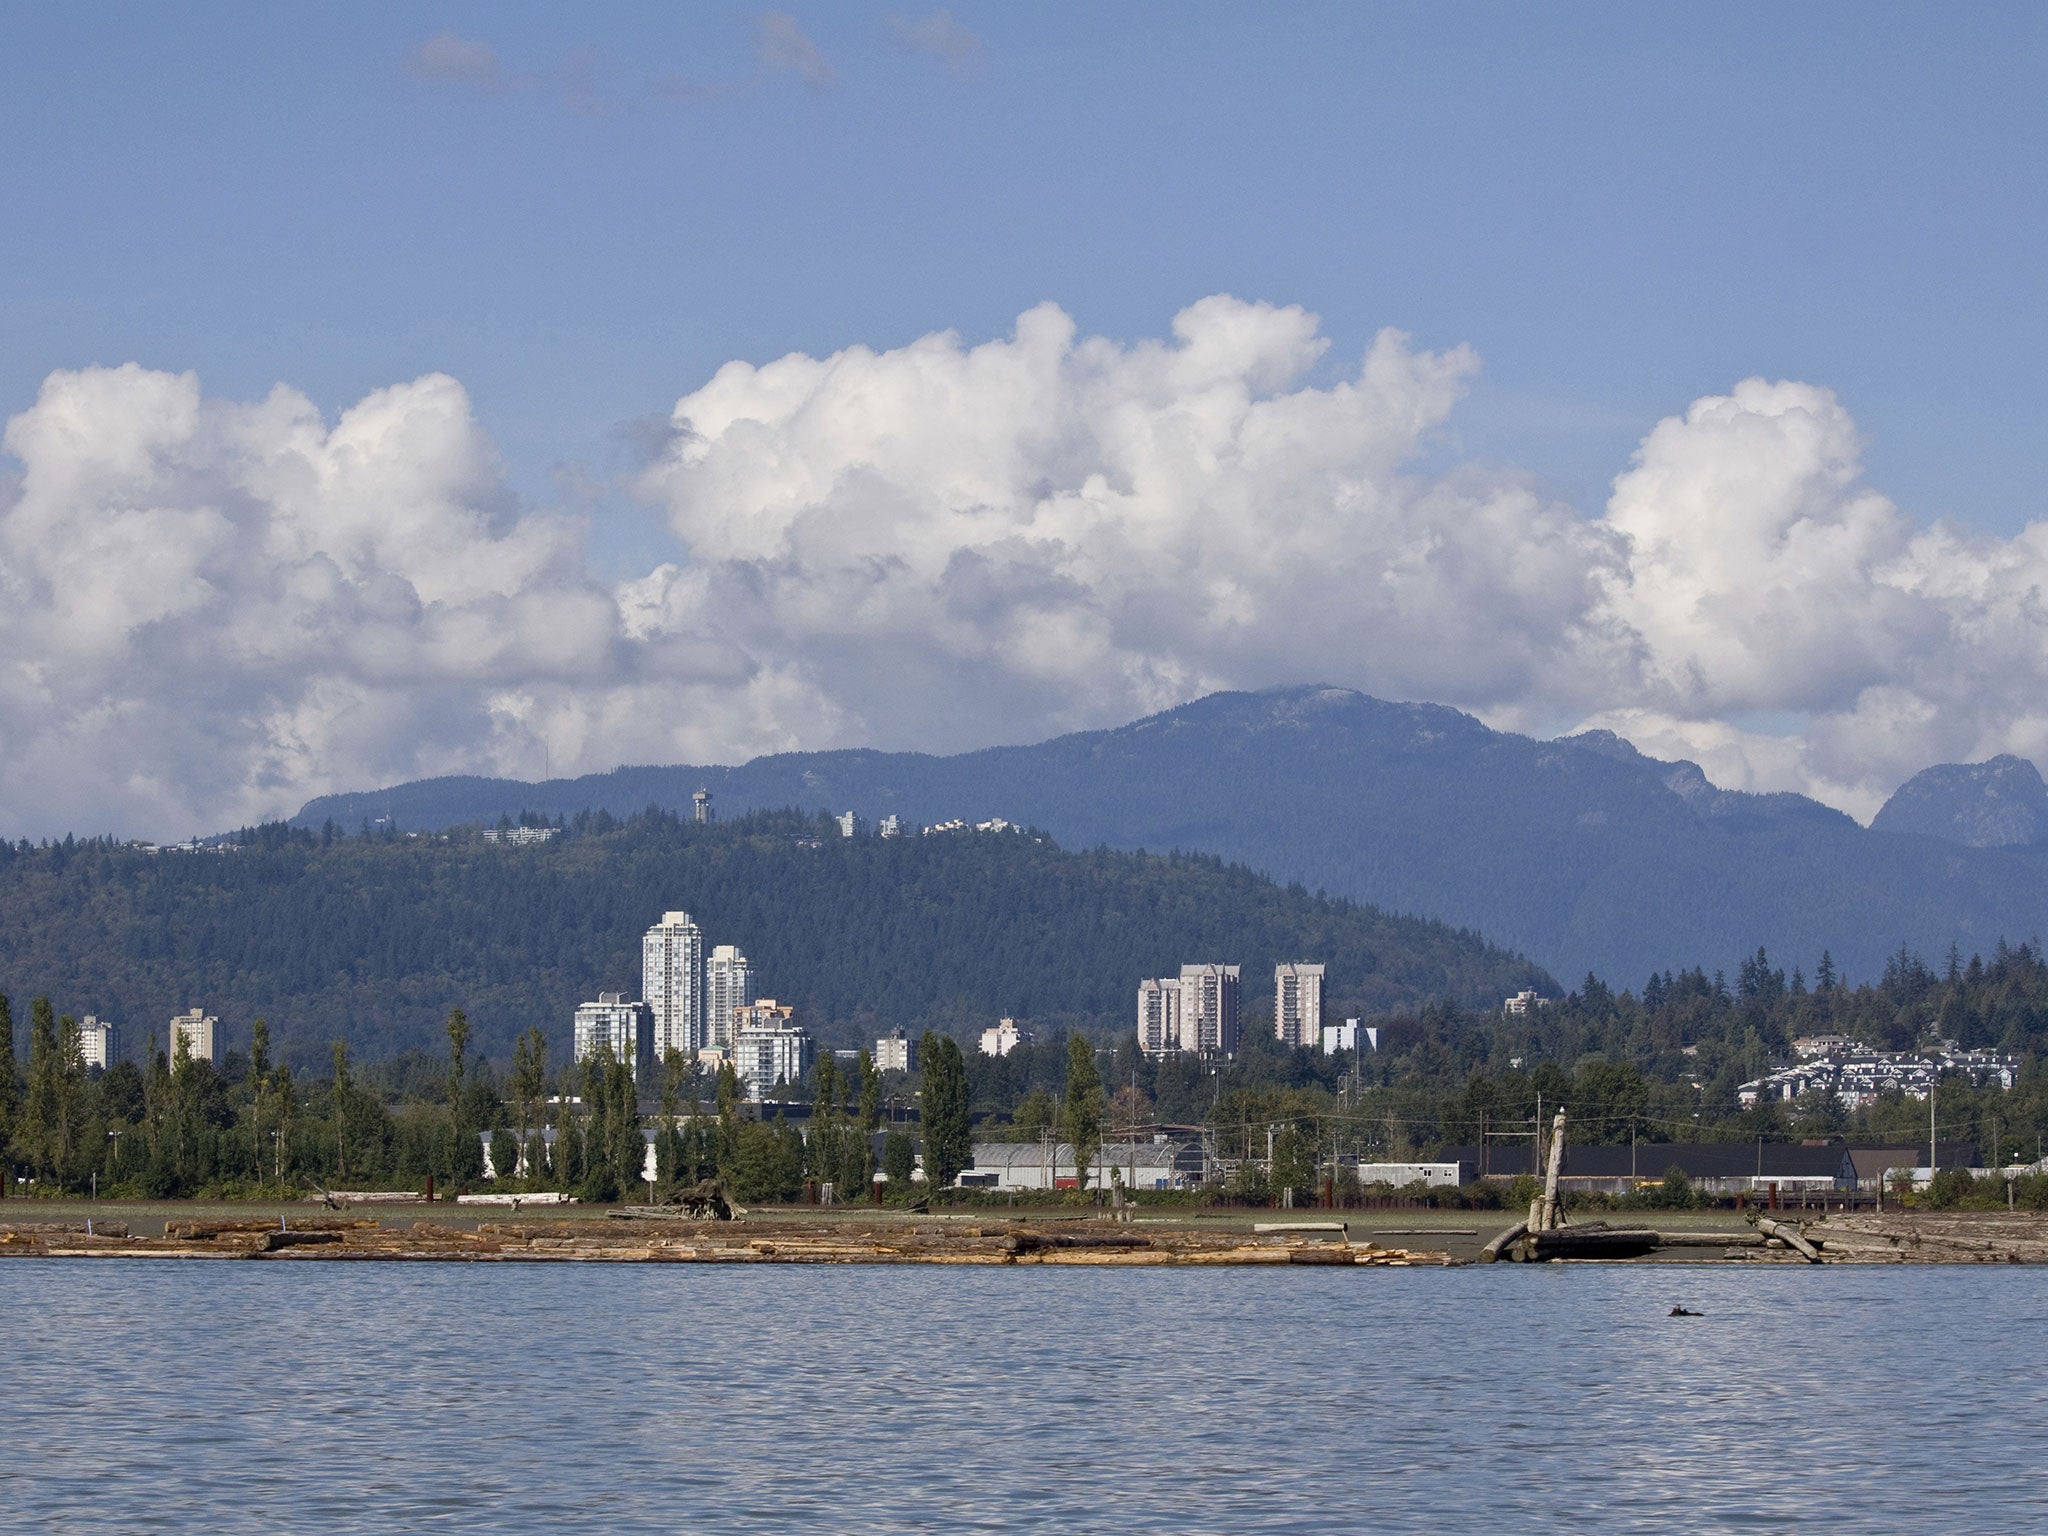 Burnaby and Coquitlam as seen from the waterfront along the Fraser River